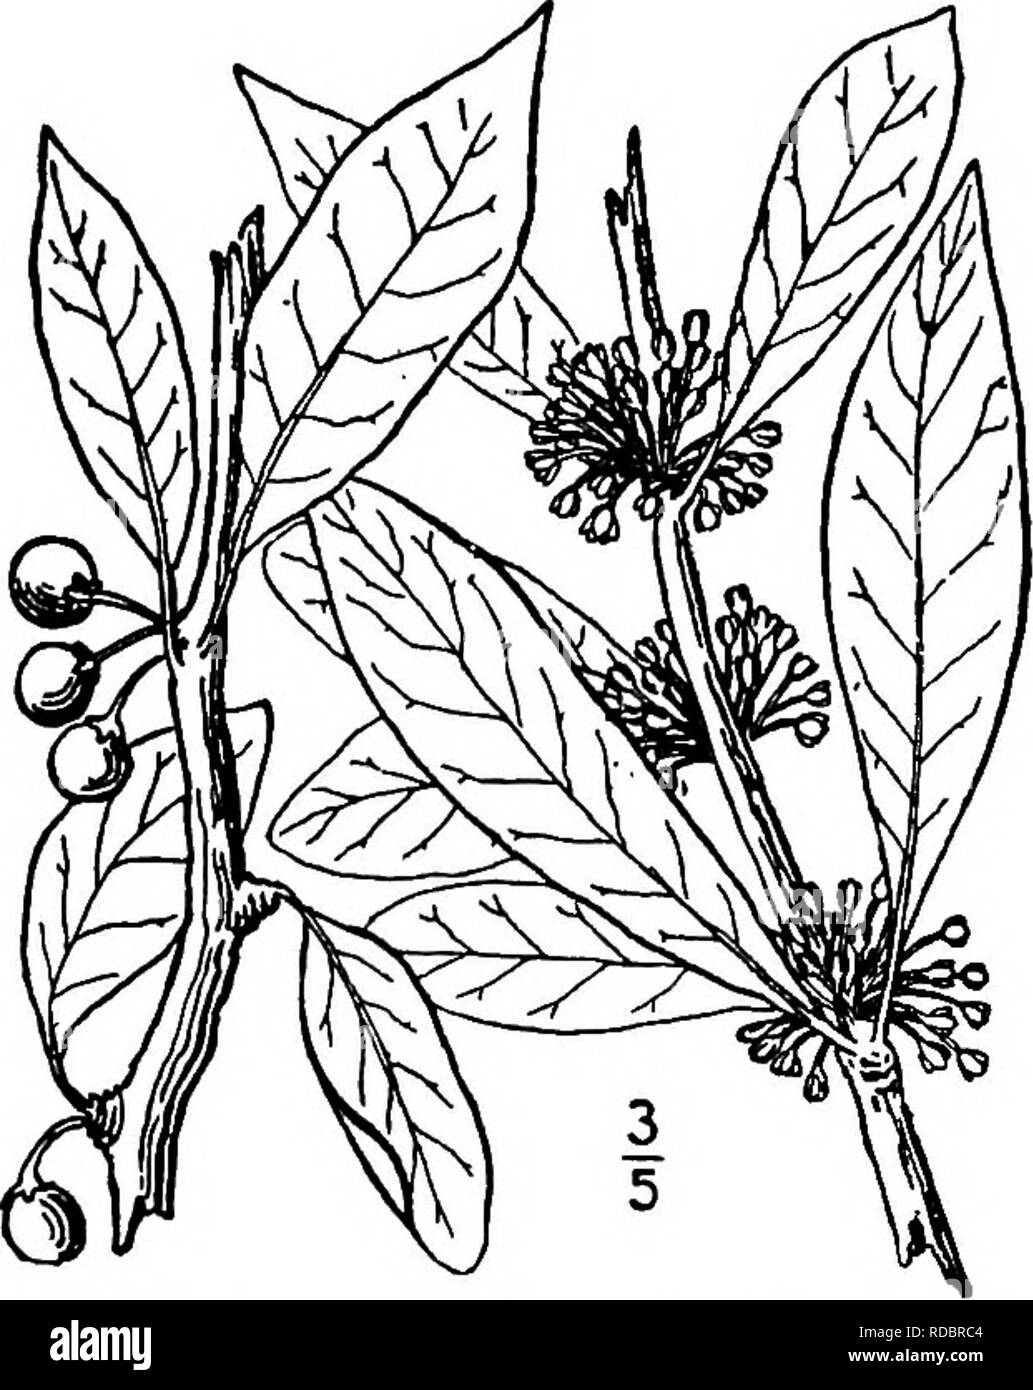 . North American trees : being descriptions and illustrations of the trees growing independently of cultivation in North America, north of Mexico and the West Indies . Trees. Southern Buckthorn 779 nodes ovate, 2 mm. long, blunt and sometimes unequal. The fruit is usually oval, 7 to 8 mm. long. 4. SOUTHERN BUCKTHORN — Bumelia lycioides (Linnasus) Gaertner Sideroxylon lycioides Linnaeus A slightly armed small tree or shrub of damp soil along streams or swamps from Virginia and Illinois to Florida and Texas, becoming 9 meters tall, with a trunk diameter of 1.5 dm. It is also called Ironwood, Buc Stock Photo